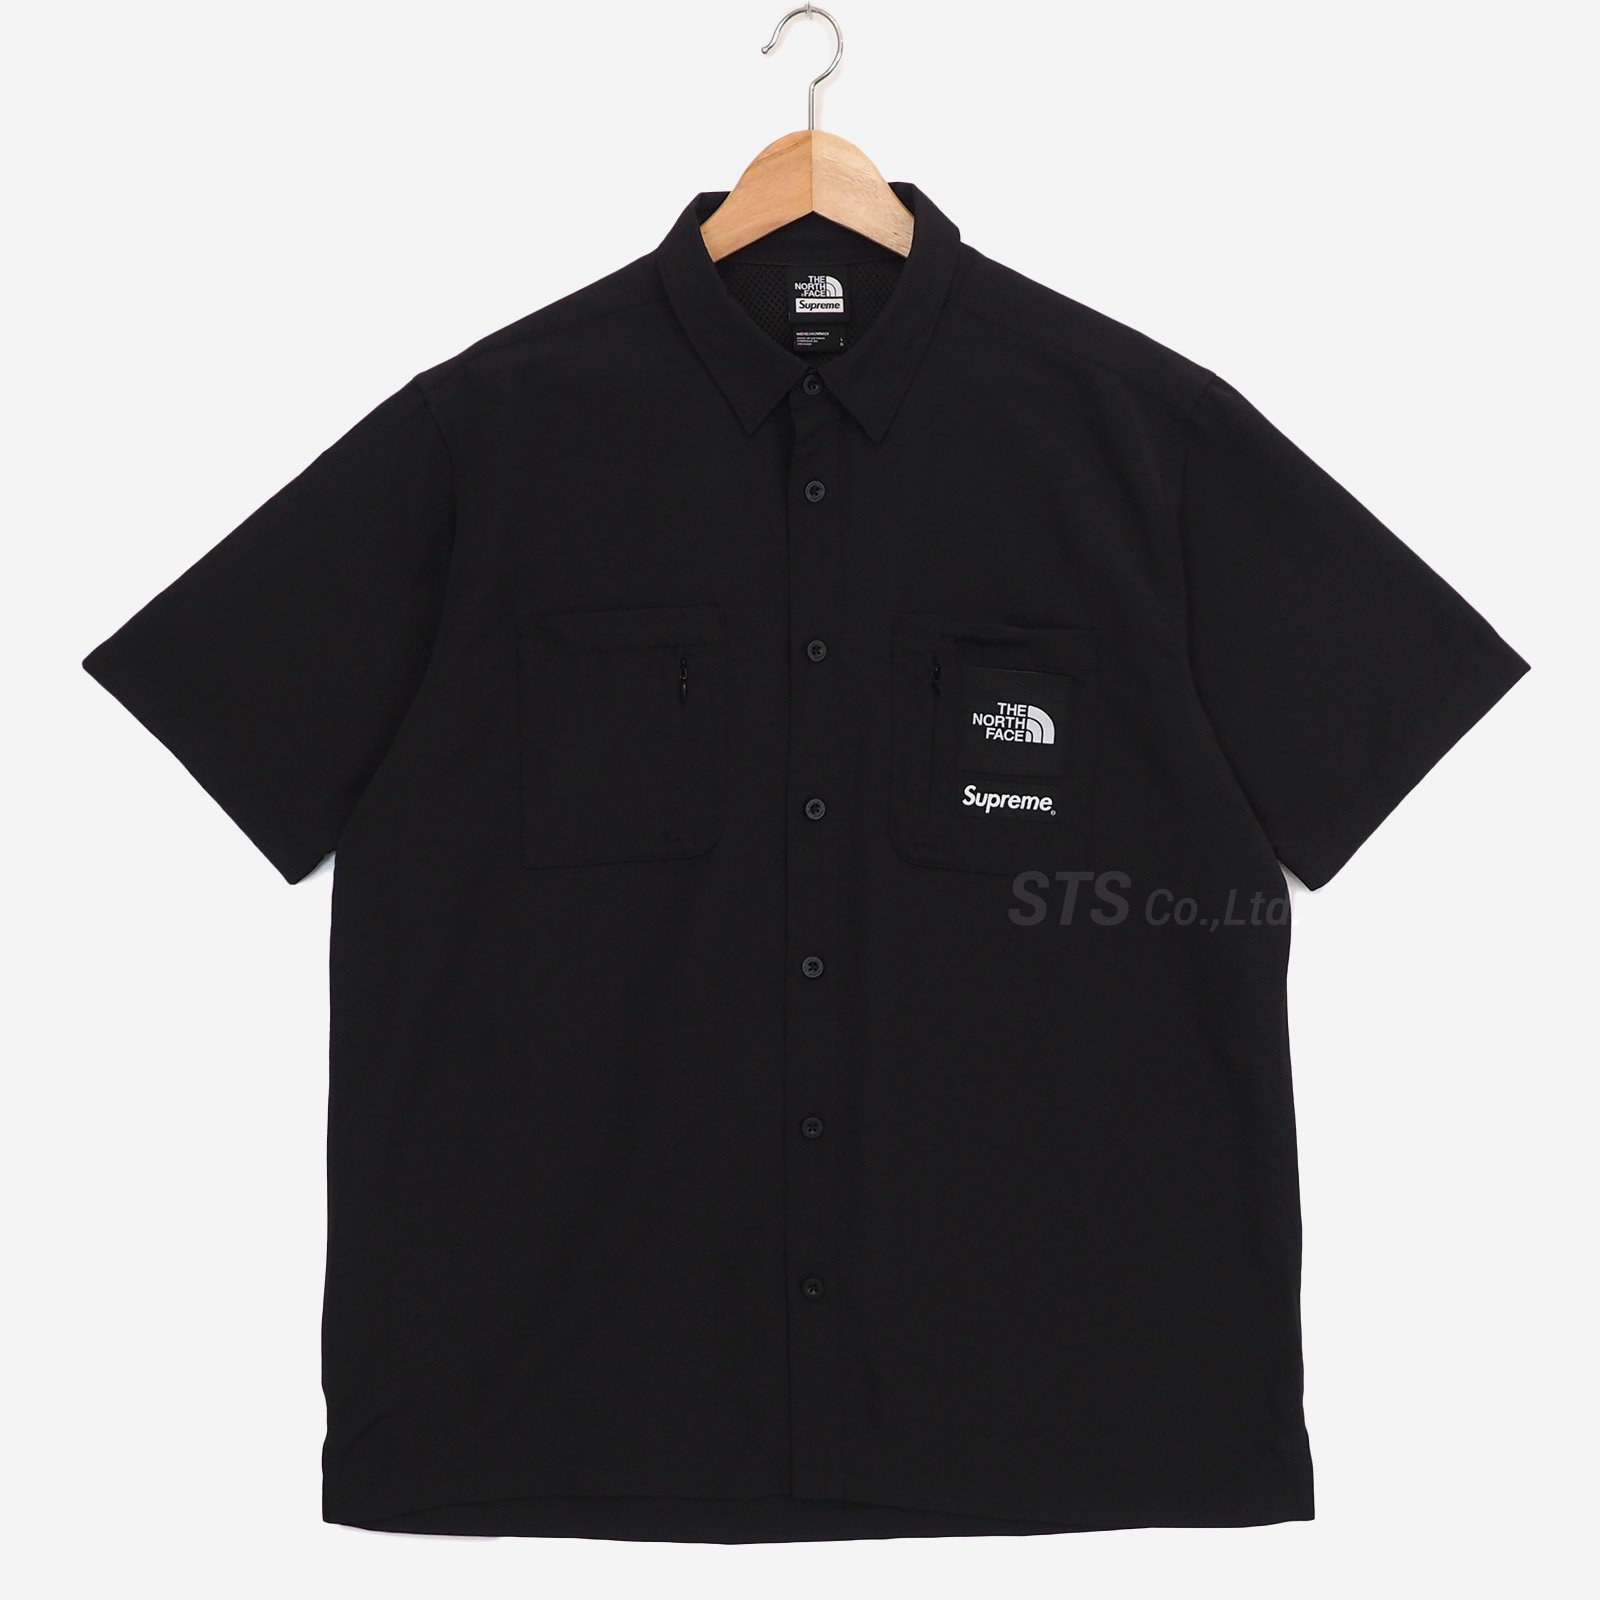 Supreme®/The North Face®  Trekking S/S